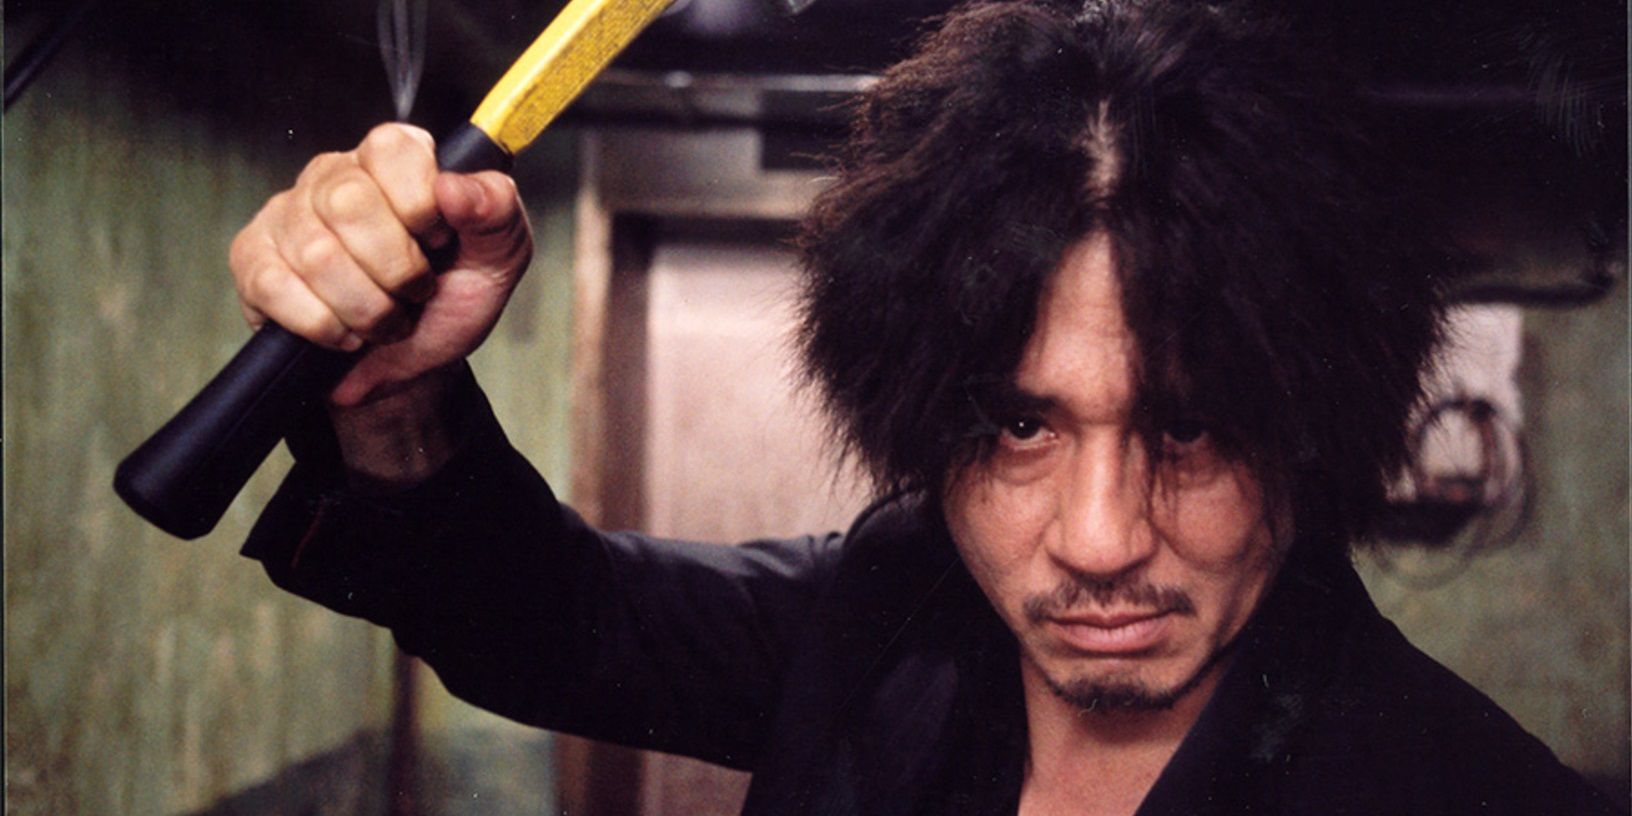 Oh Dae-su holds a weapon in Oldboy